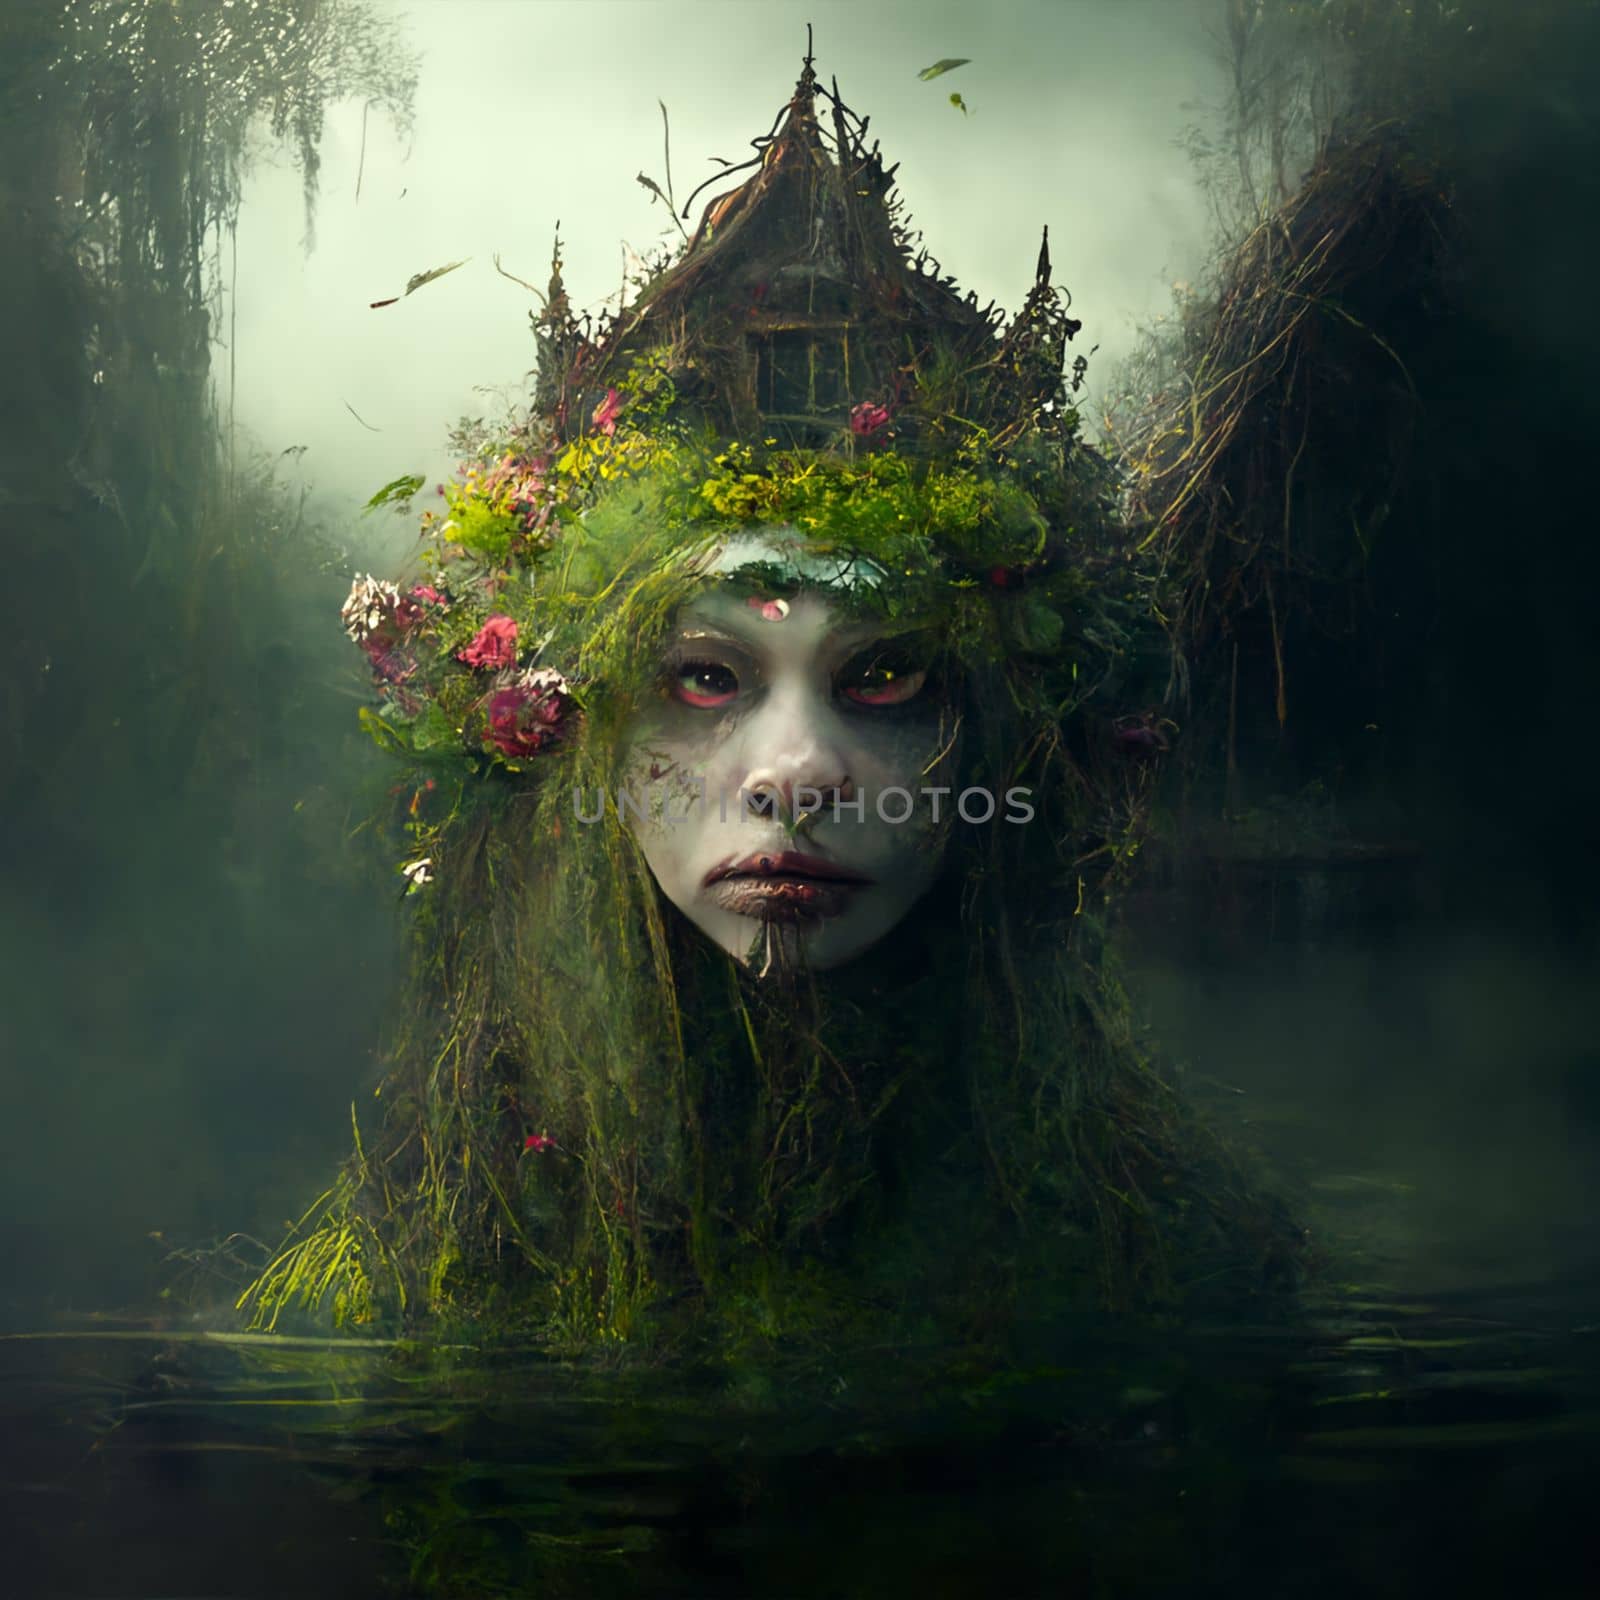 Swamp witch with moss on her head chest-deep in water by studiodav